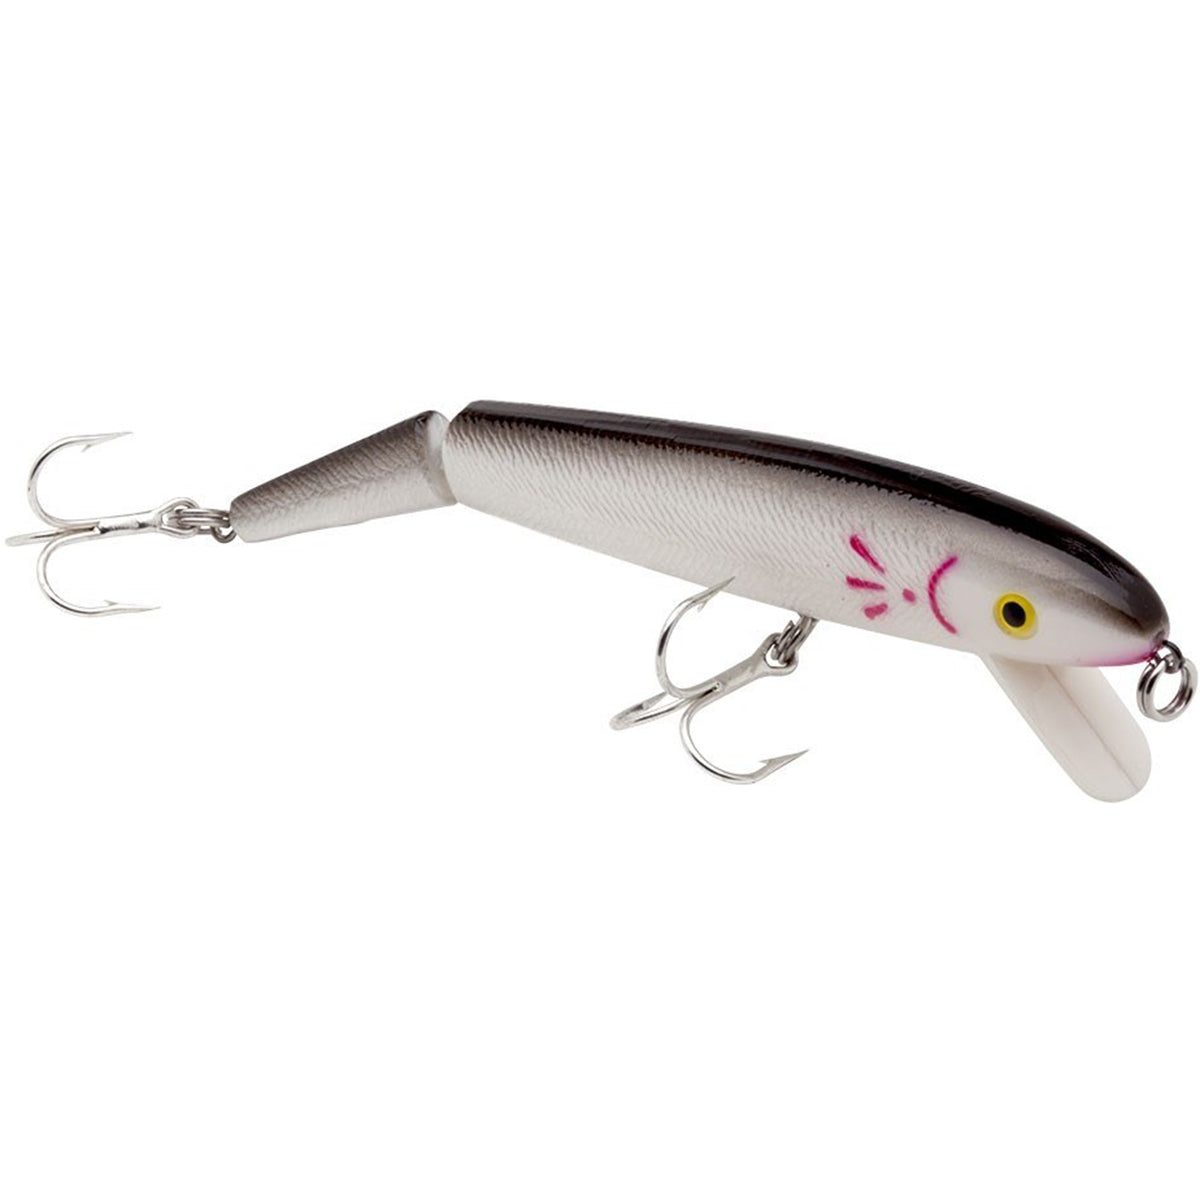 Cotton Cordell Jointed Red Fin 5/8 oz Fishing Lure Cotton Cordell